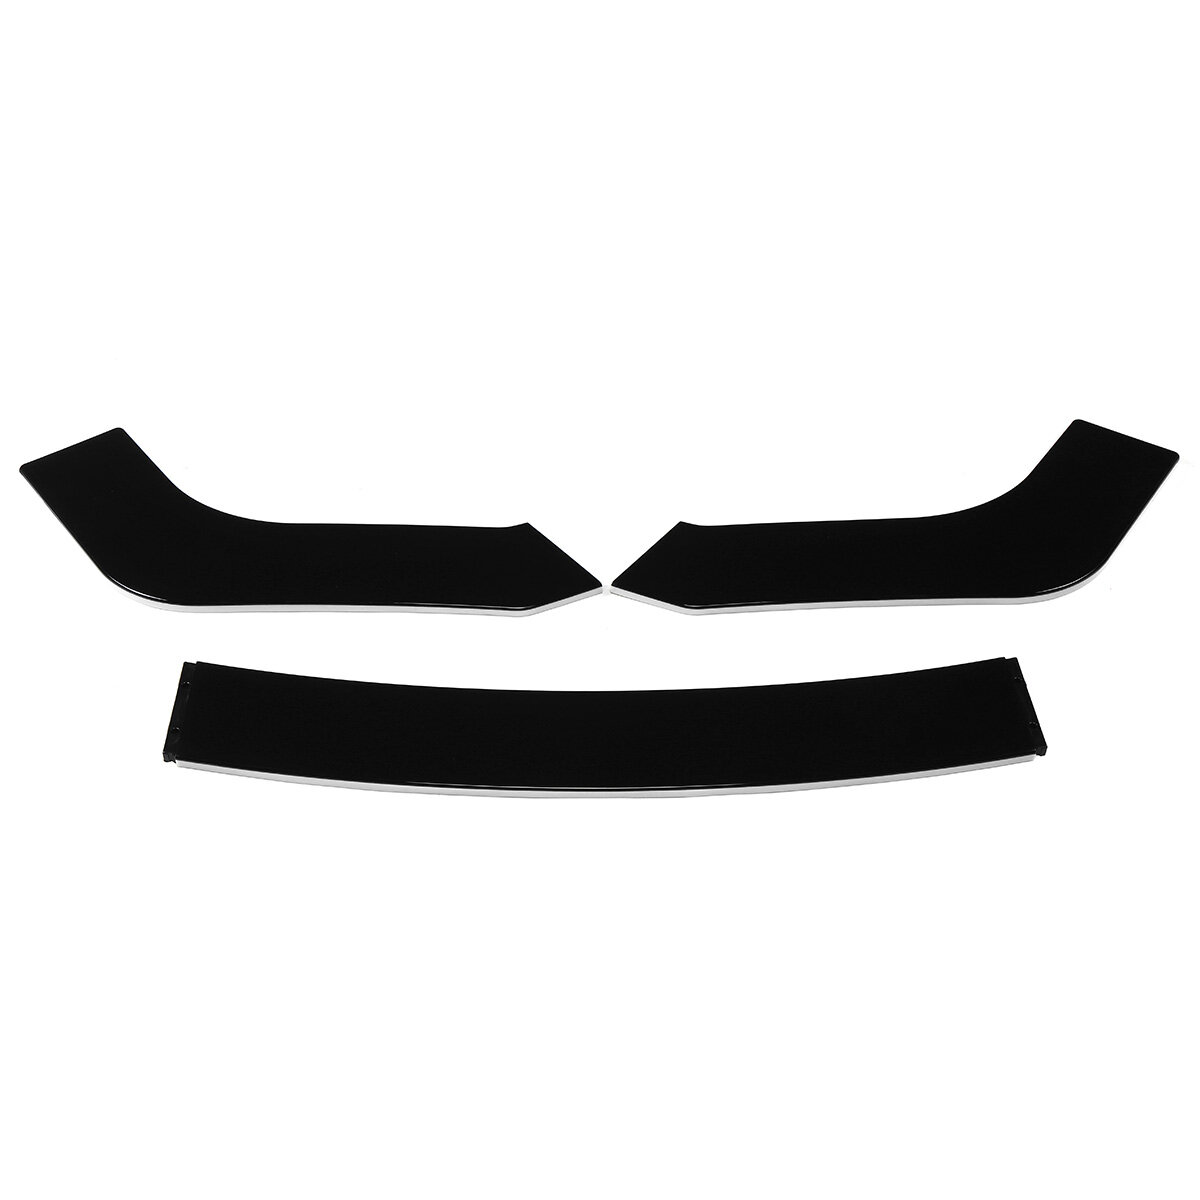 Image of Front Lip Chin Bumper Protector Body Kits Black with White Line Fits Universal Car Bumper Exterior Body Accessories